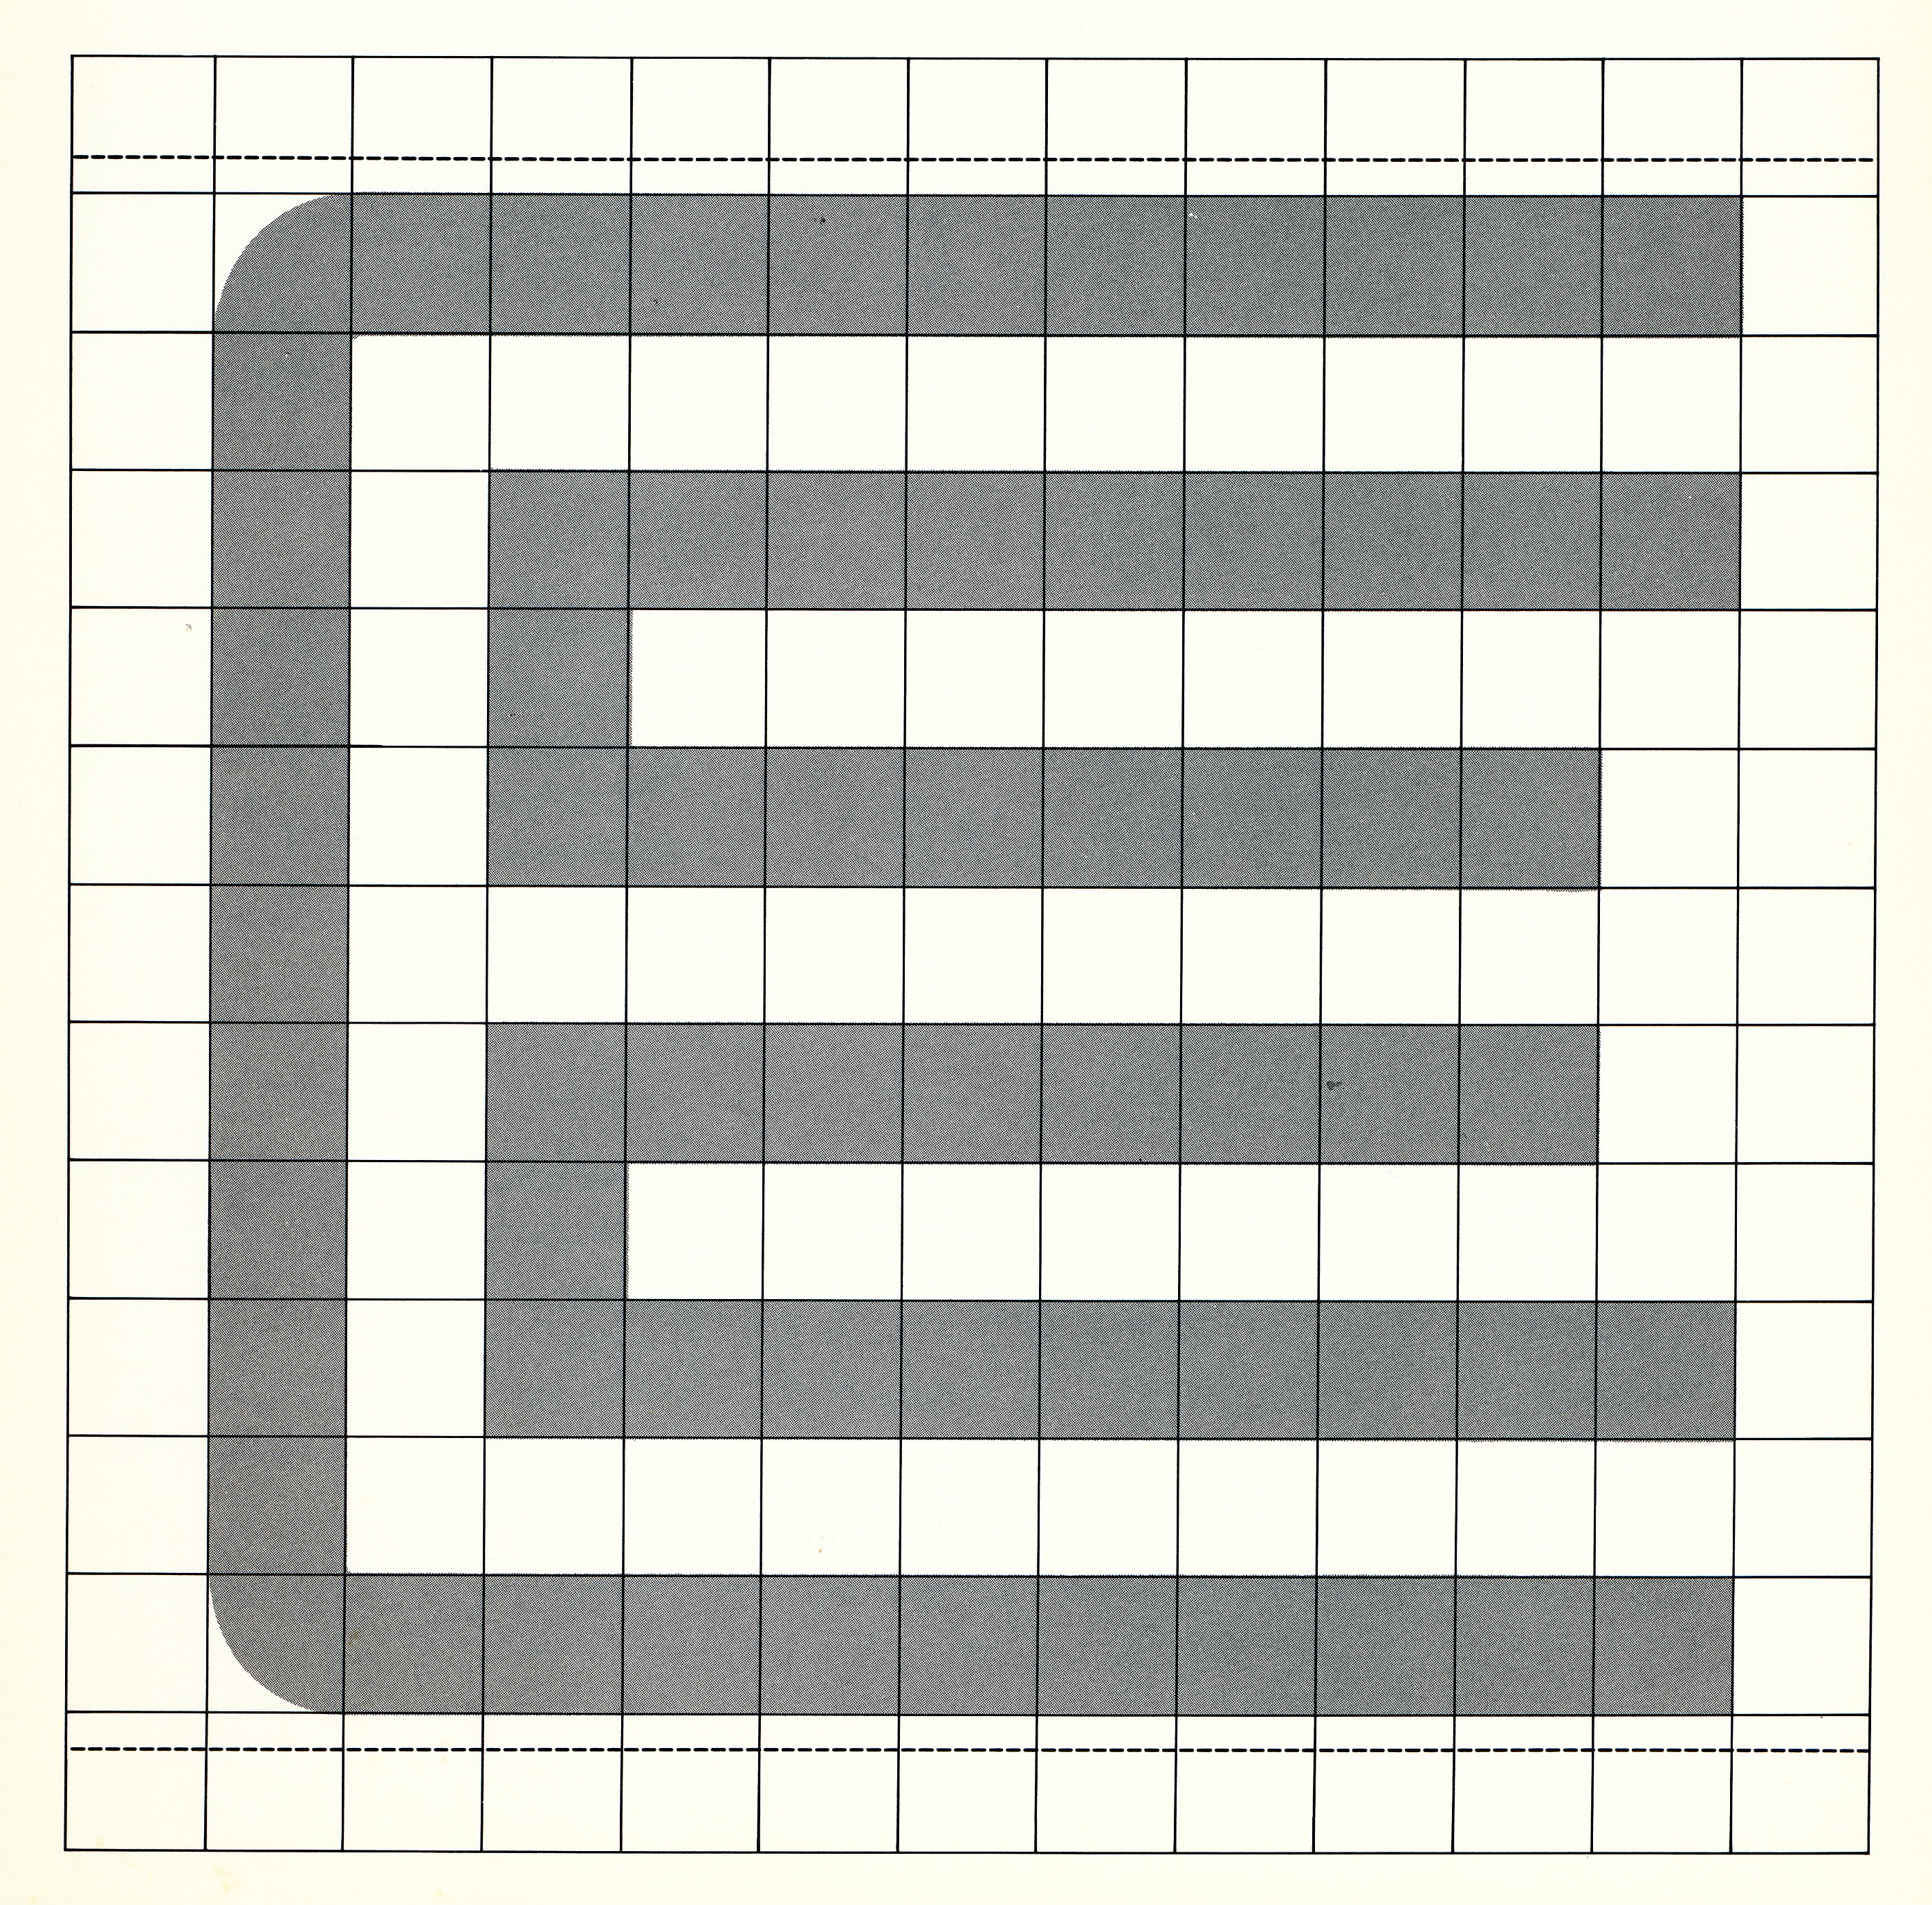 Sculpture of a large letter E on a wall.